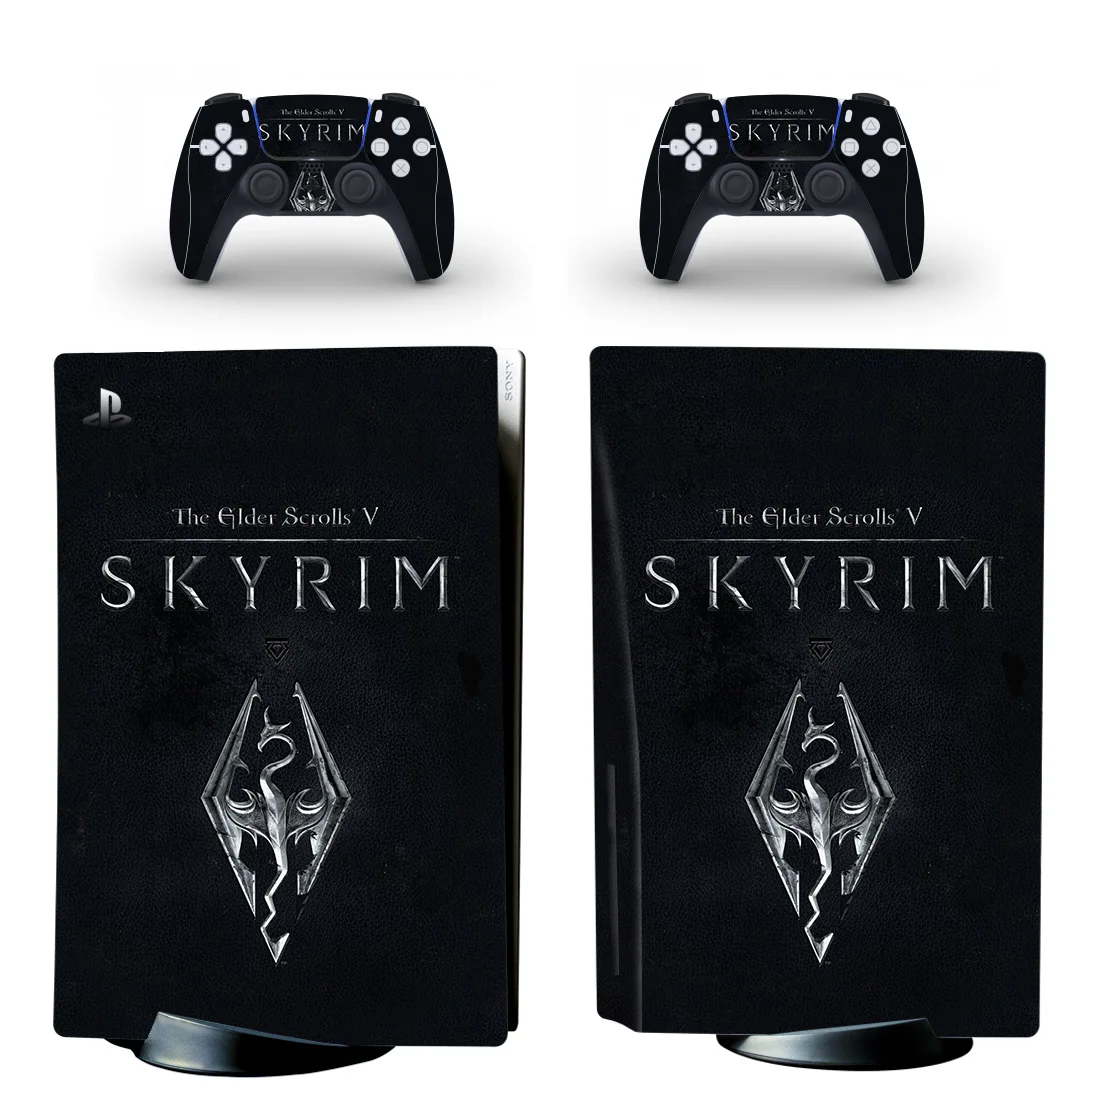 The Elder Scrolls V Skyrim PS5 Disc Skin Sticker for Playstation 5 Console & 2 Controllers Decal Vinyl Protective Disk Skins 2